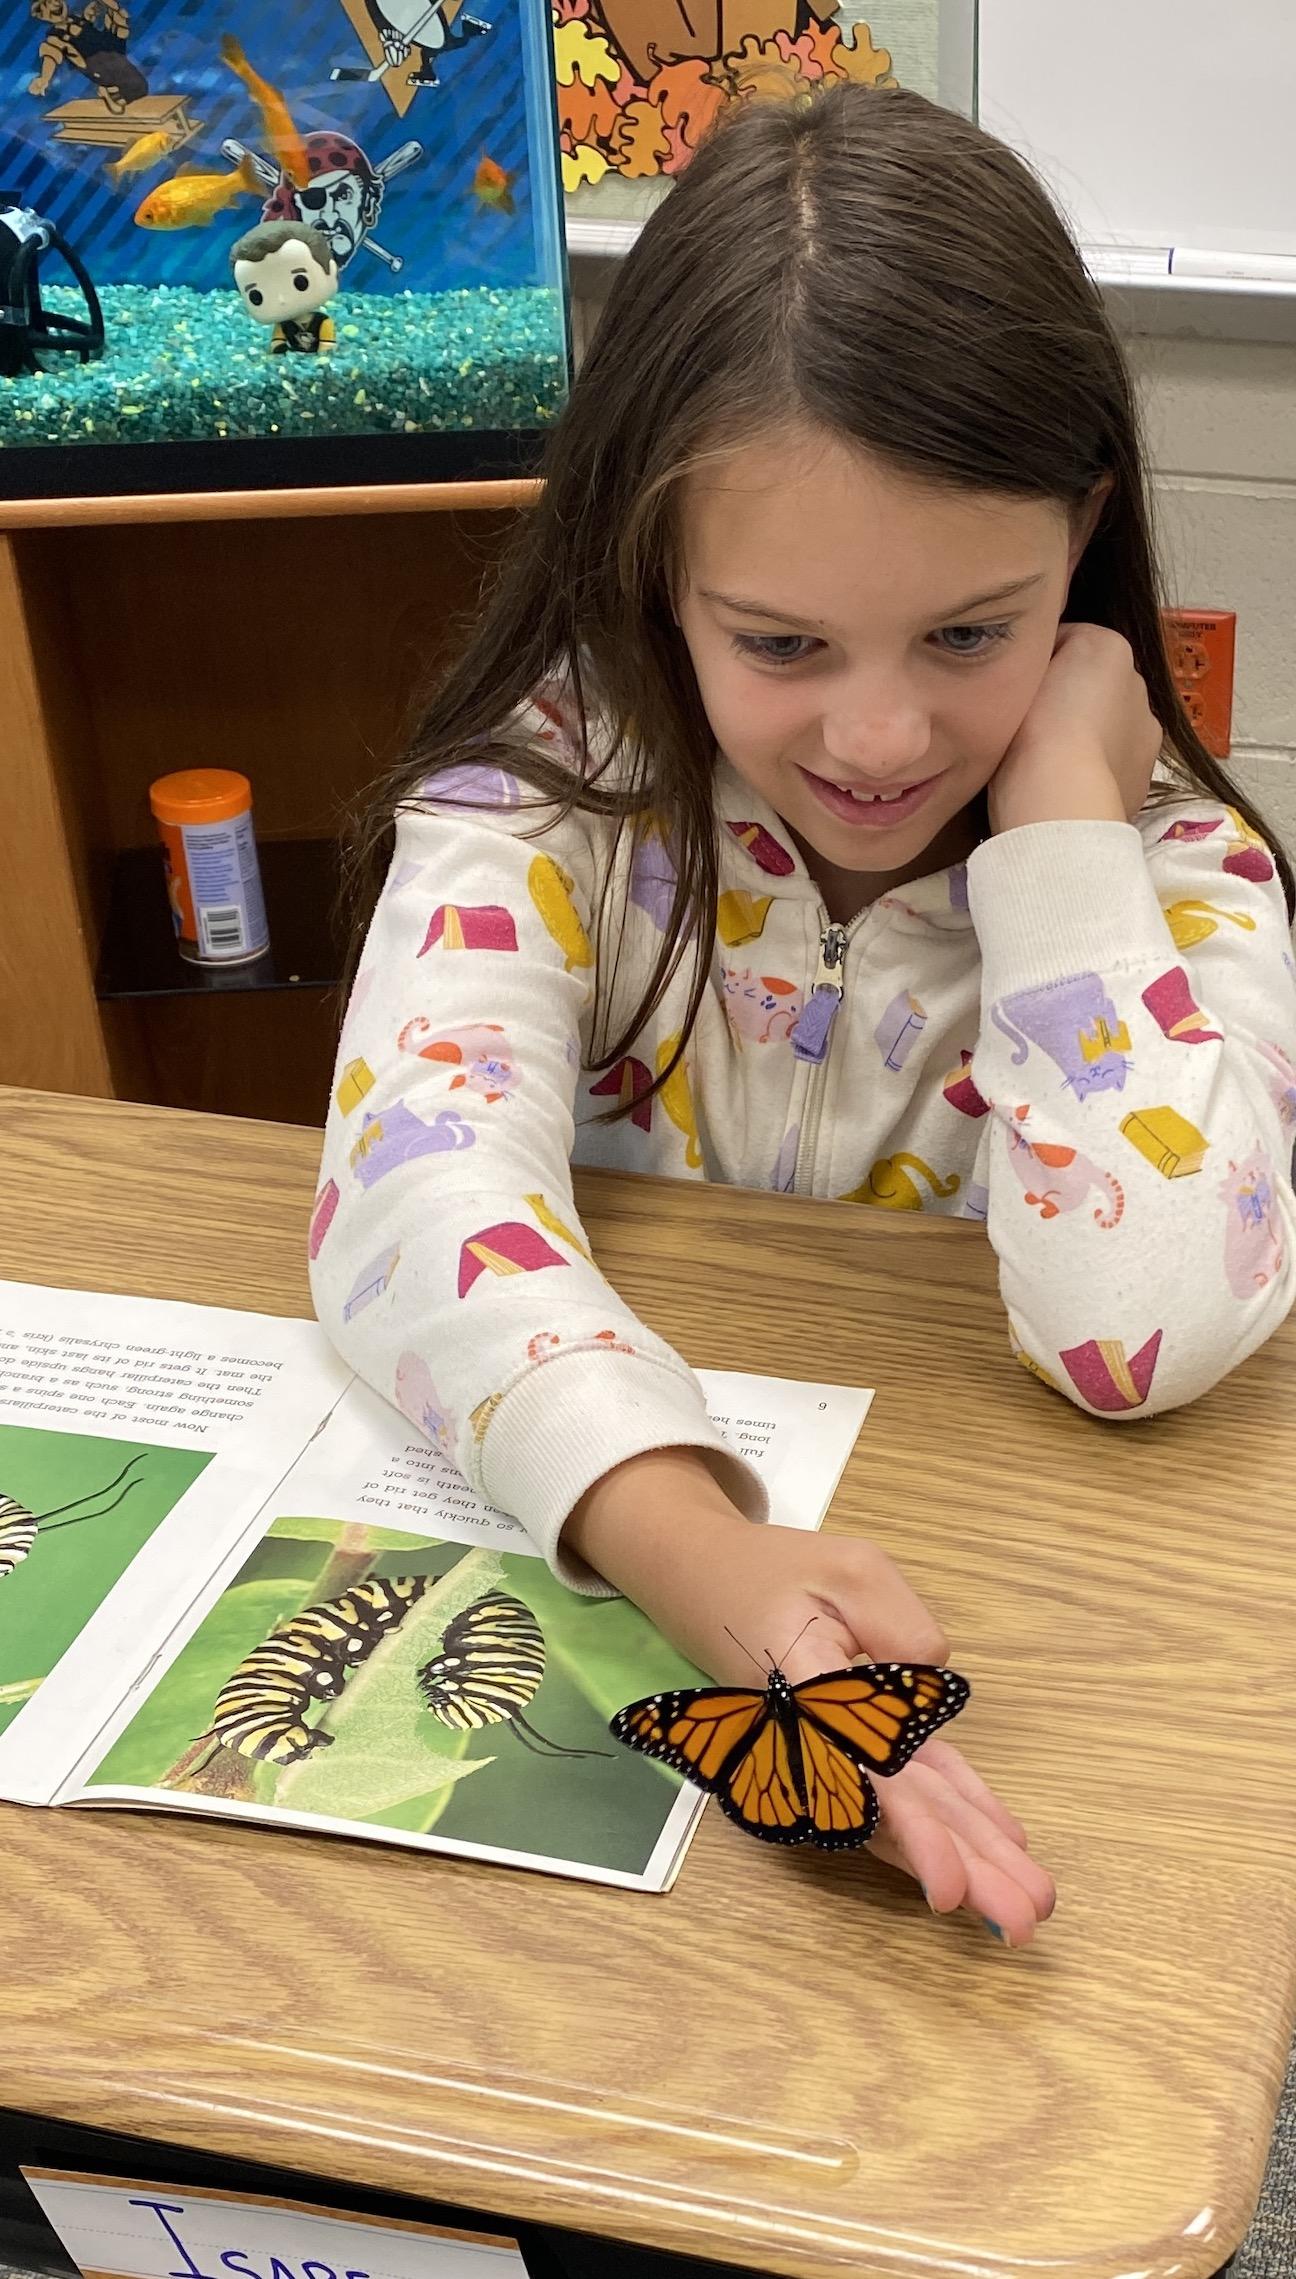 Bella Dorosh observes a butterfly while reading “The Amazing Monarch”